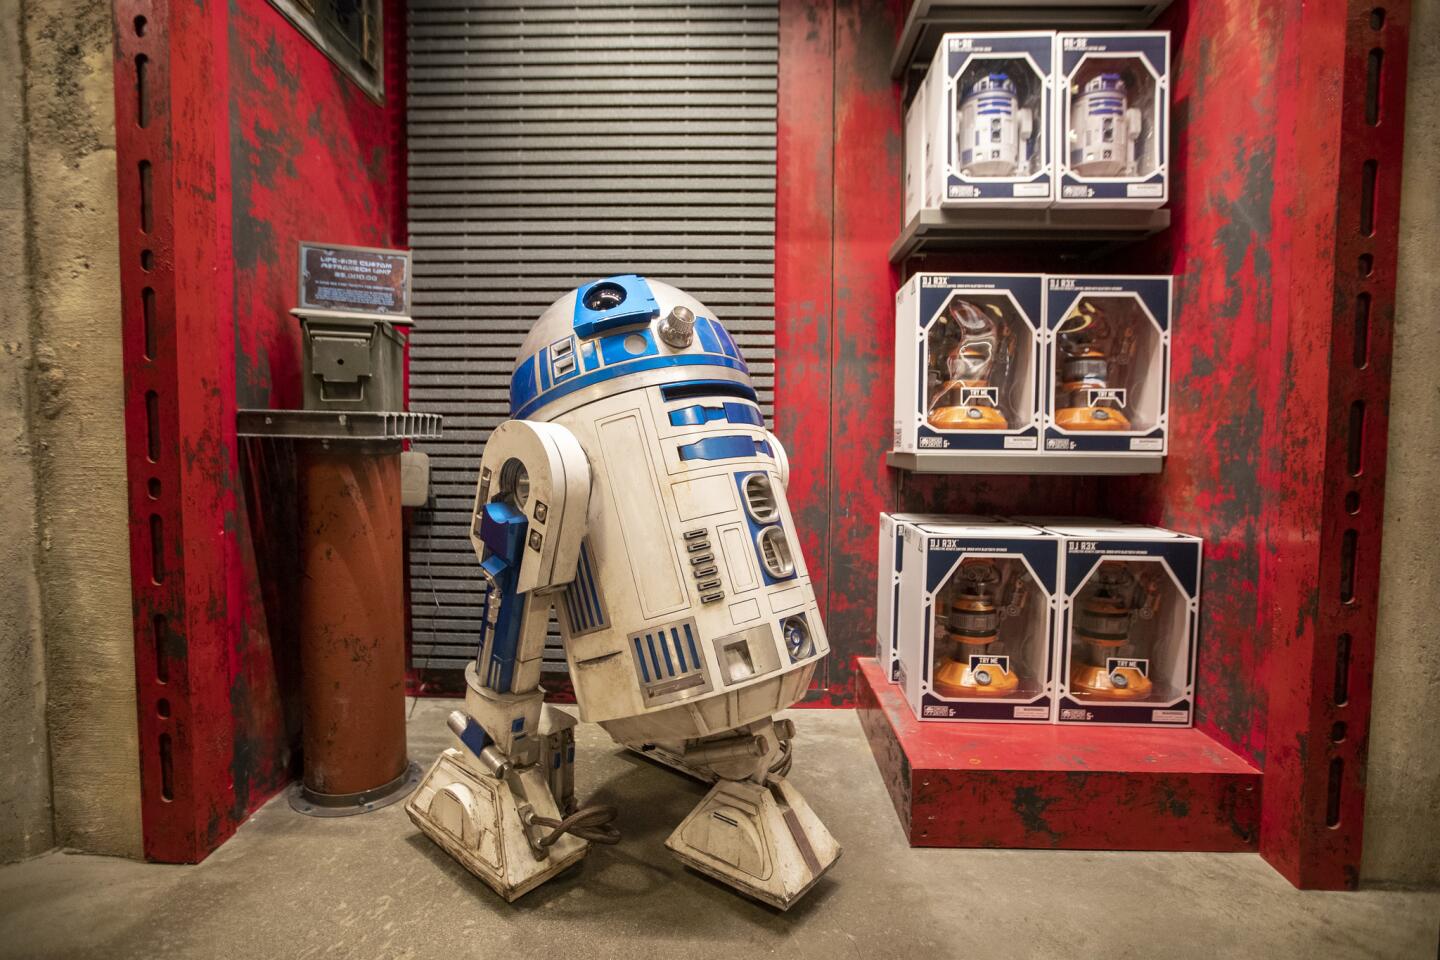 A view of merchandise for sale at the Droid Depot inside Star Wars: Galaxy's Edge.